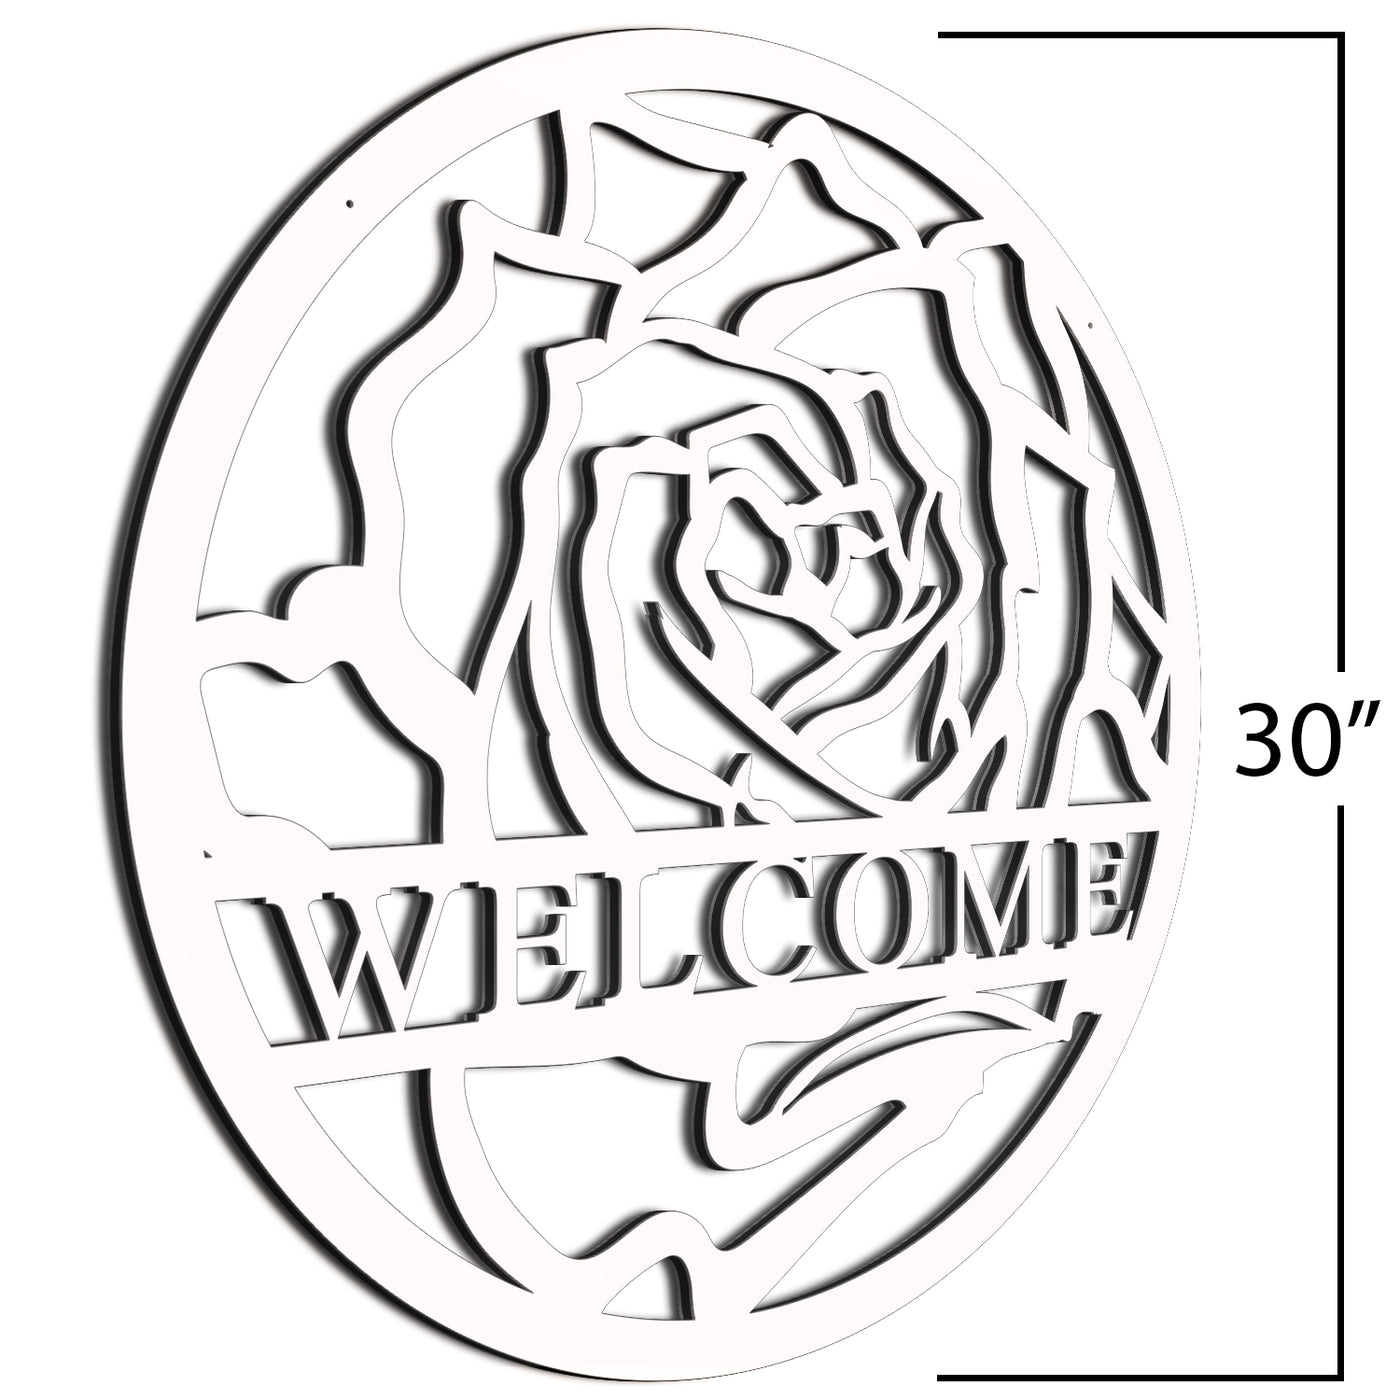 White Rose Weclome Sign  30 Inch